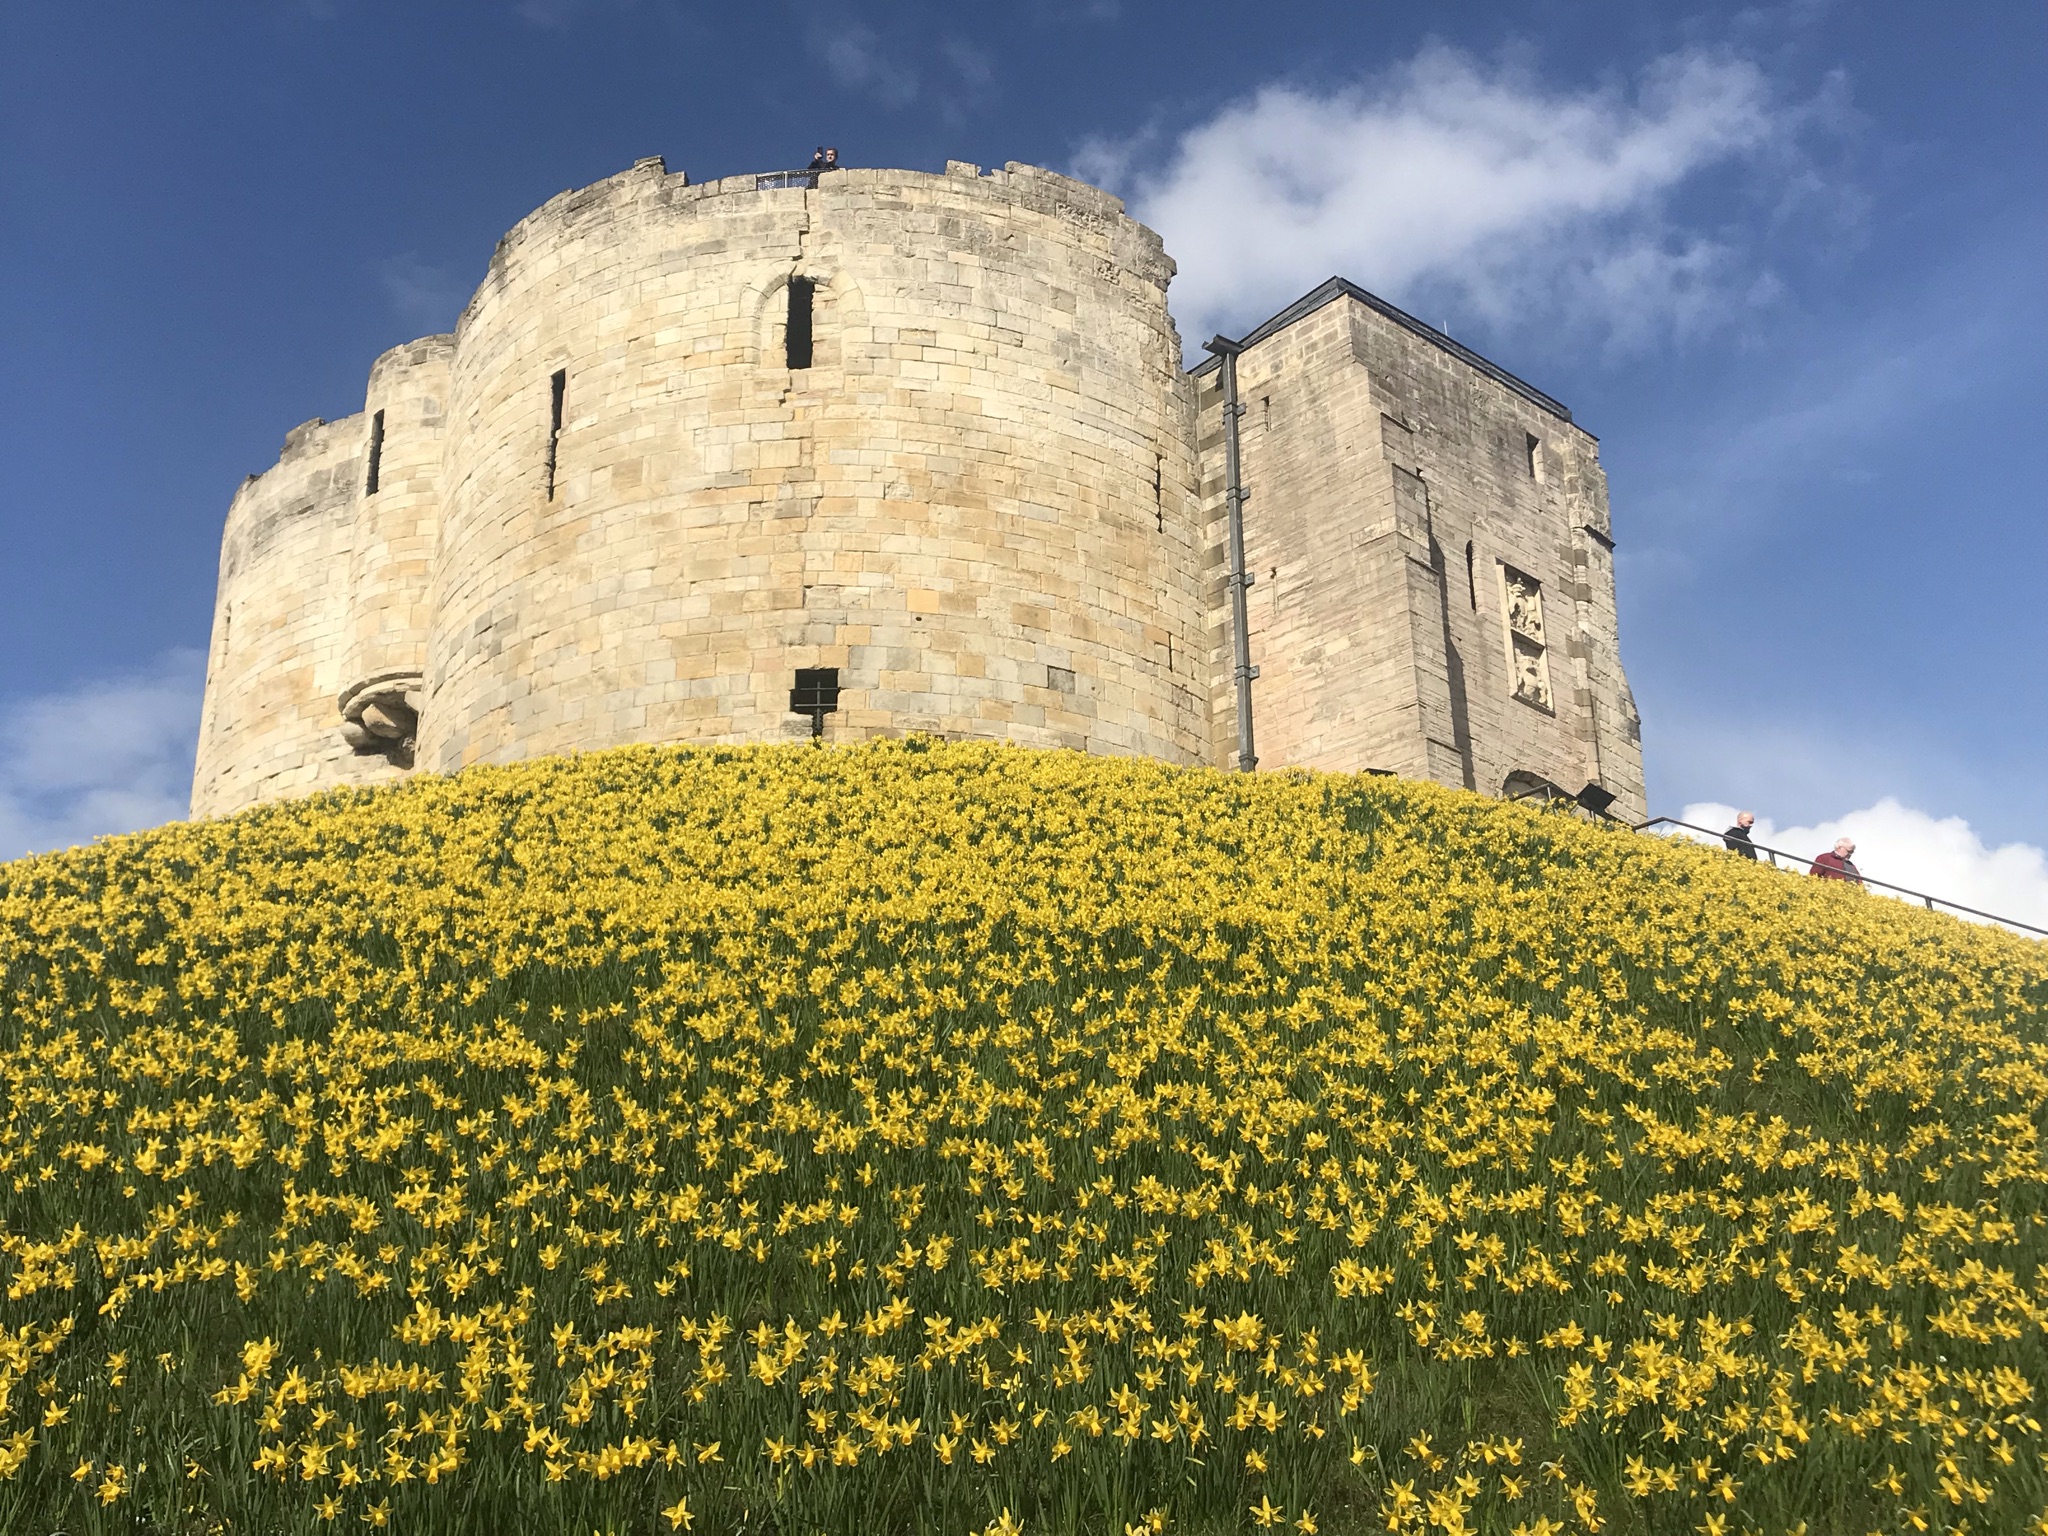 Daffodils on the banks of Clifford's Tower